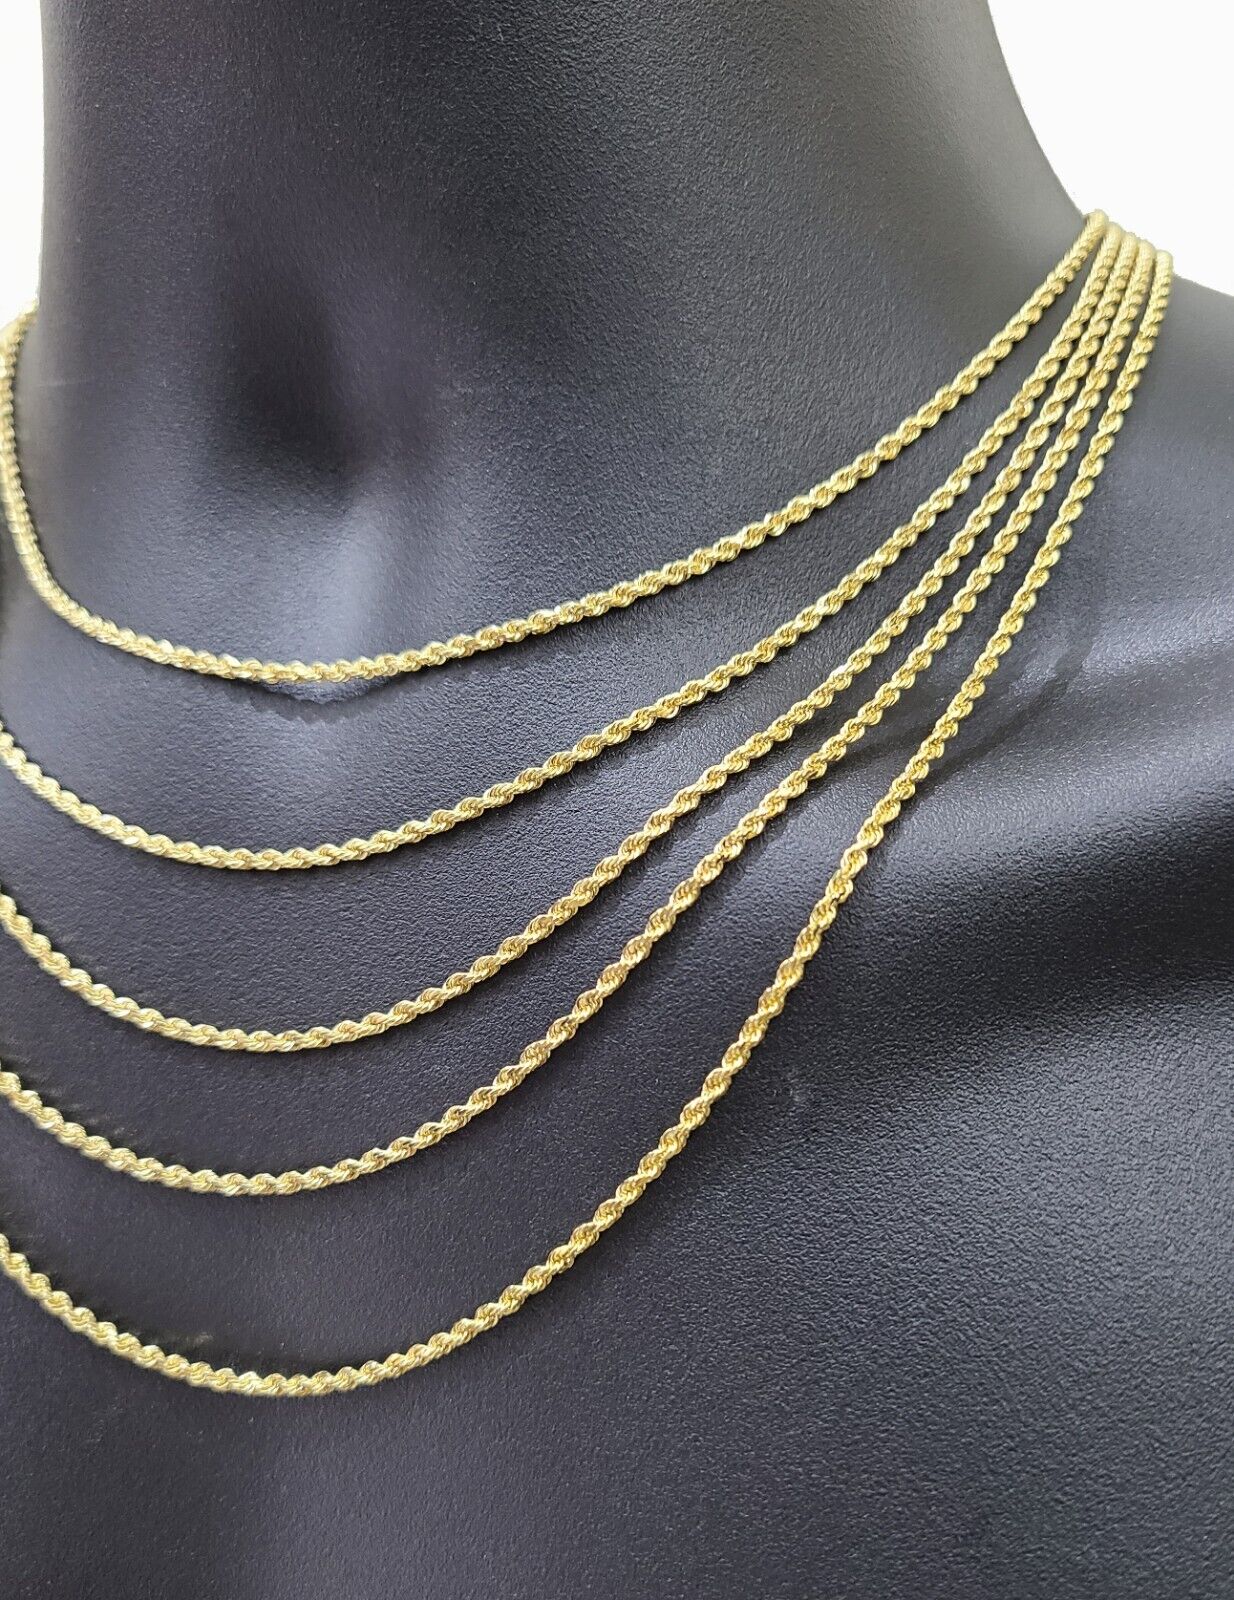 Buy 14k Gold Filled Necklace, 16, 17, 18, 19, 20 Inch Gold Necklace Chain,  Gold Filled Chain, Gold Chain, Jewelry Supplies, 14k Gold Chain Online in  India - Etsy